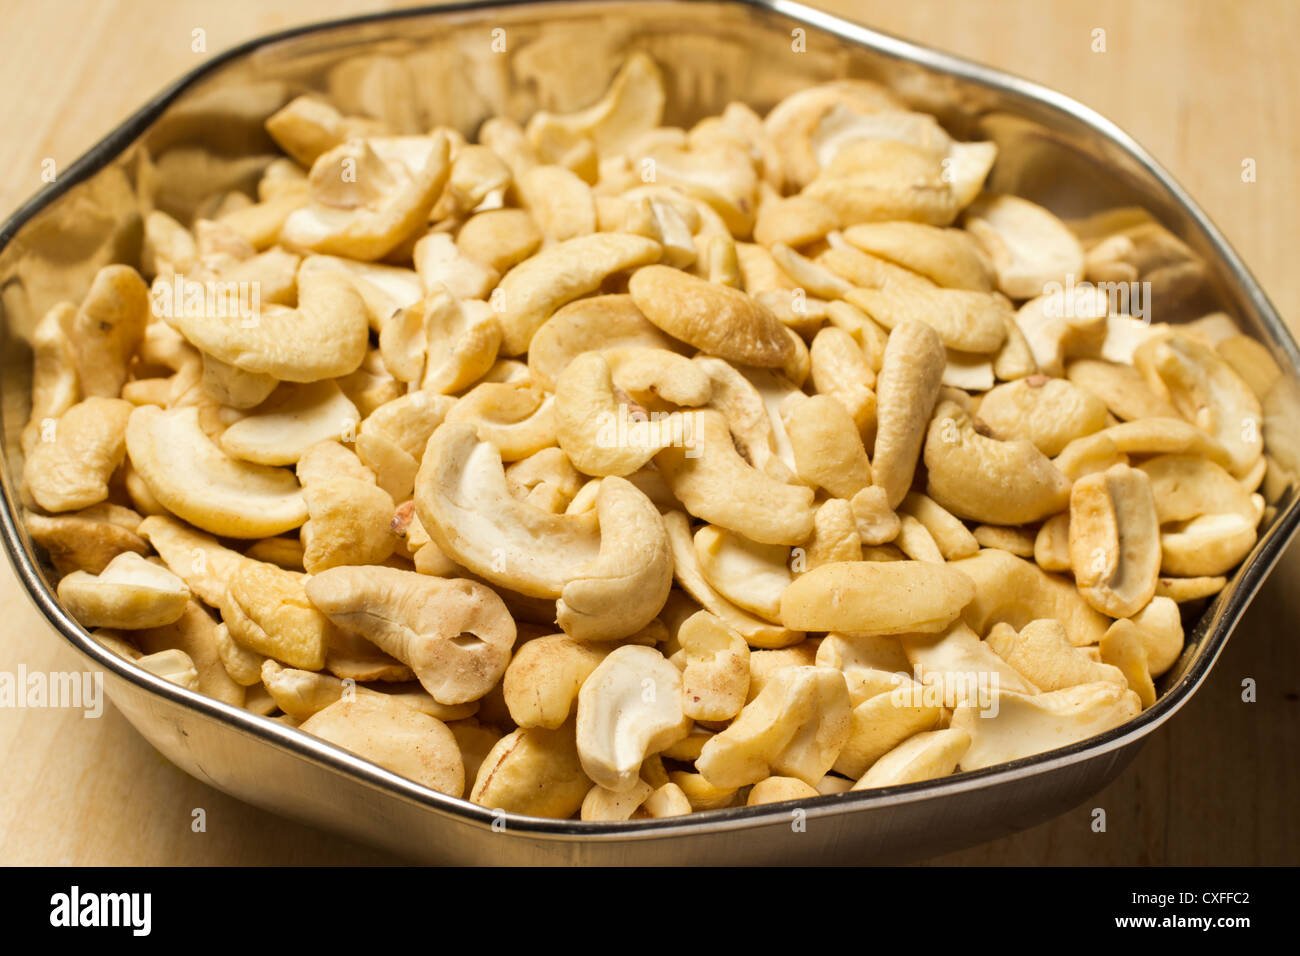 Broken Cashews, used as a cooking ingredient Stock Photo